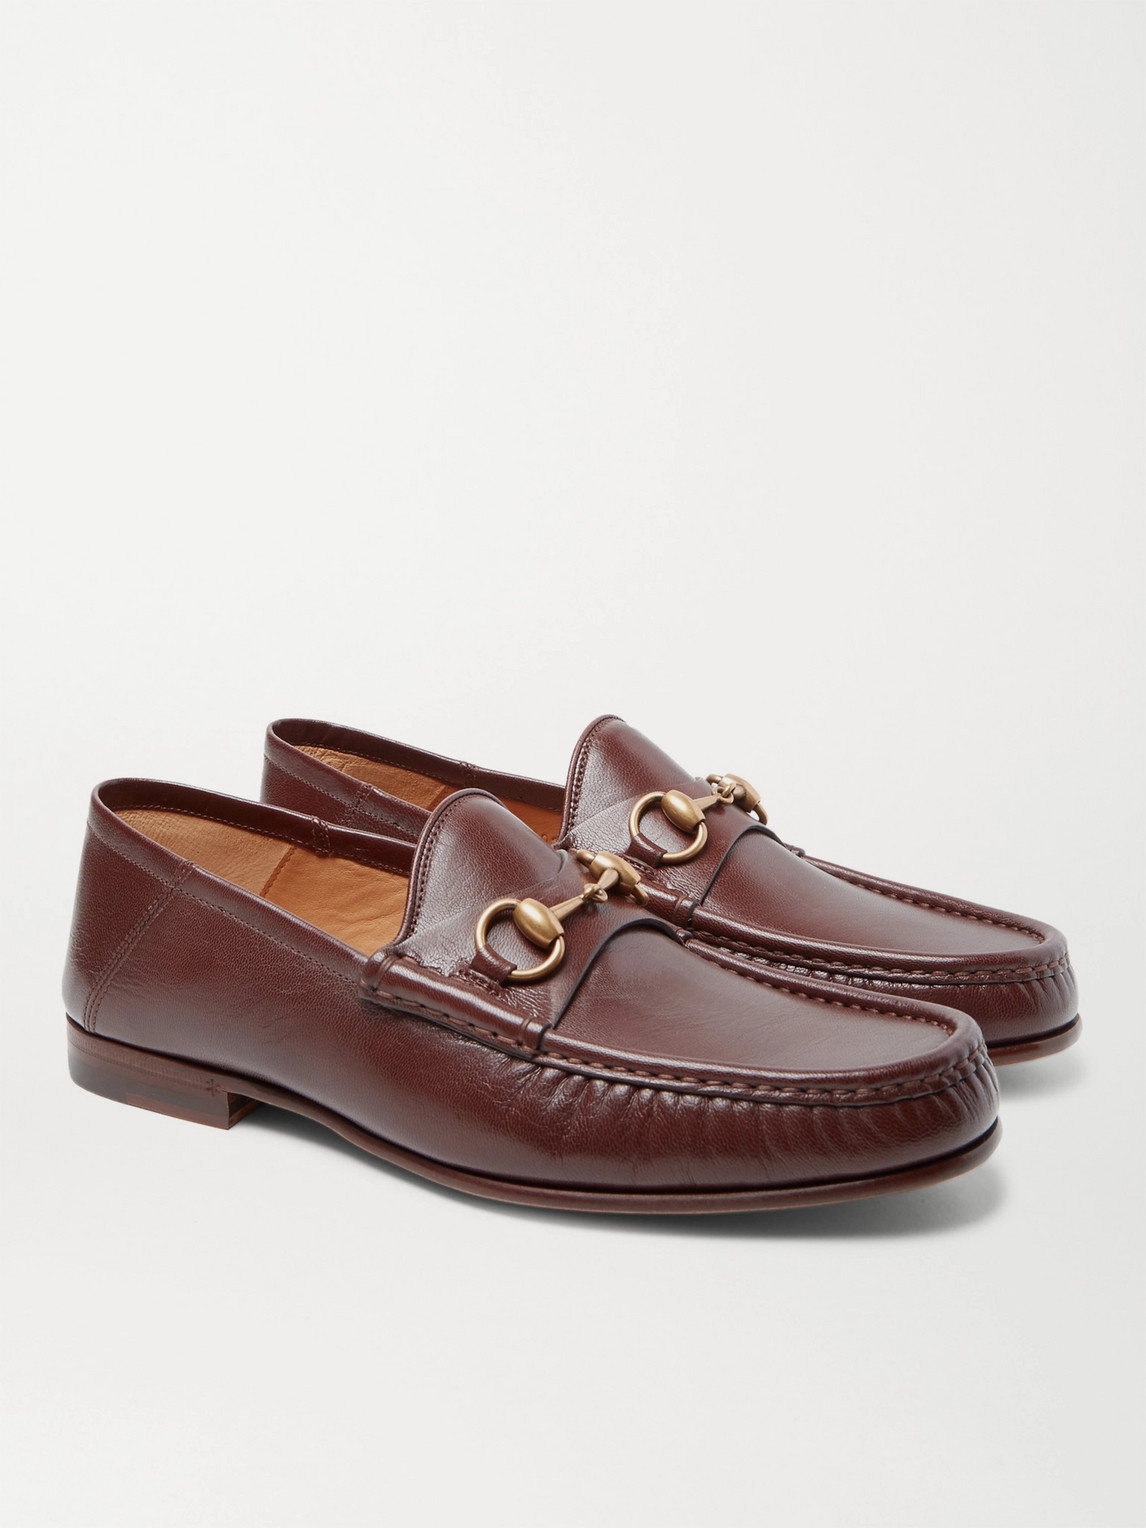 GUCCI EASY ROOS HORSEBIT COLLAPSIBLE-HEEL LEATHER LOAFERS